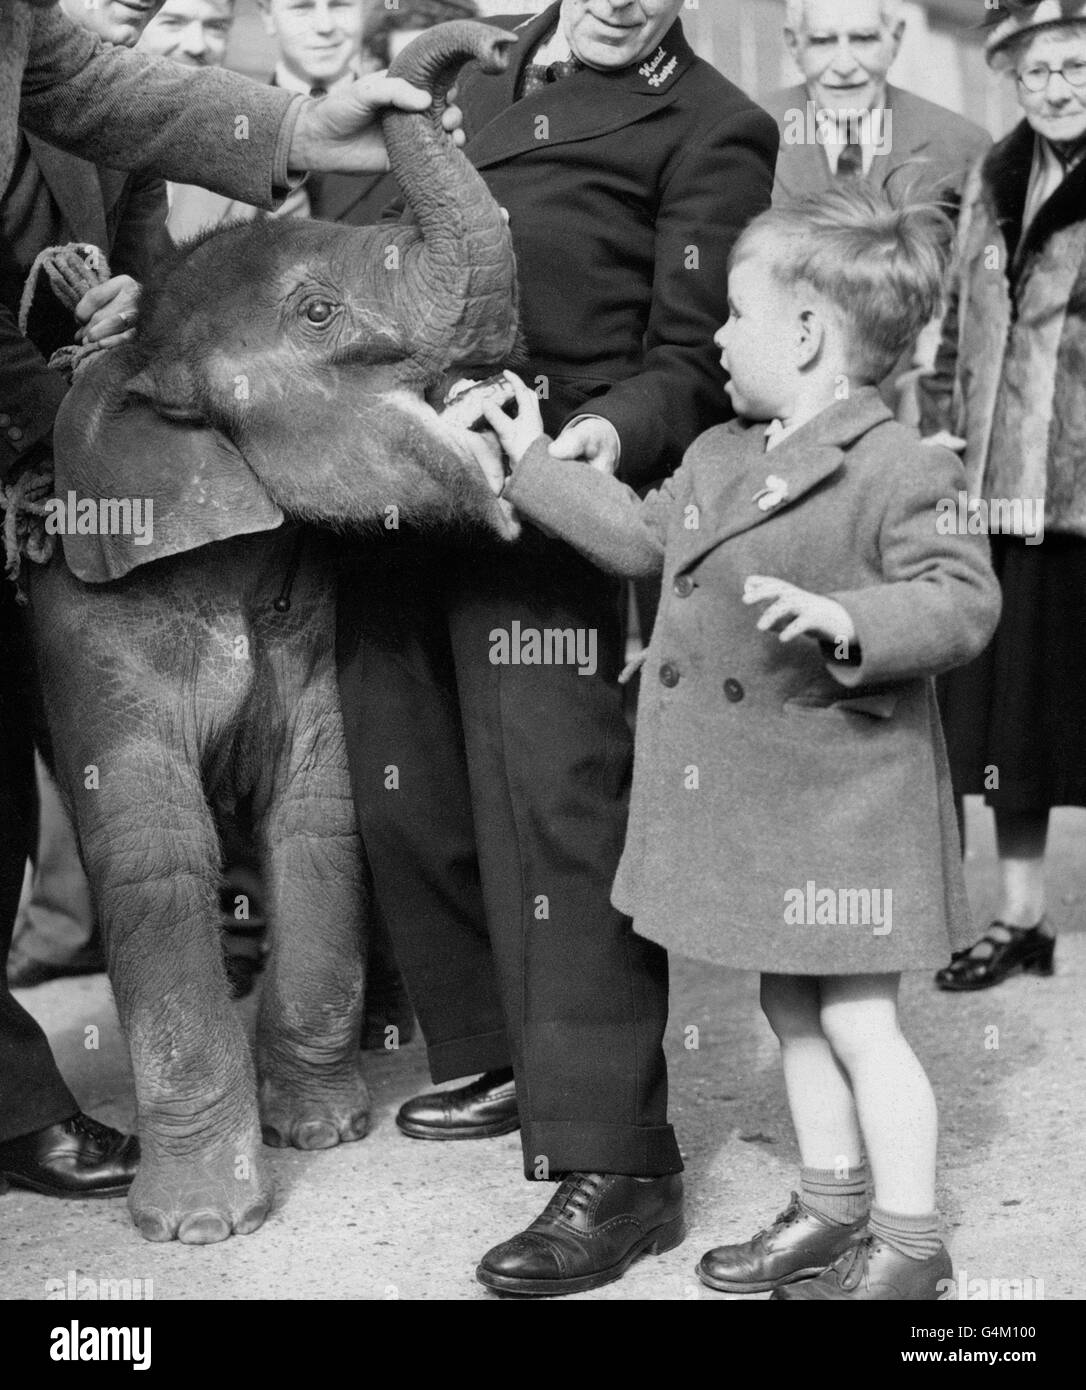 Four year old David Cansdale feeds the latest arrival to London Zoo, four month old elephant 'Dumbo'. The elephant, seen here on it's arrival at London Airport, has been flown from Calcutta Stock Photo